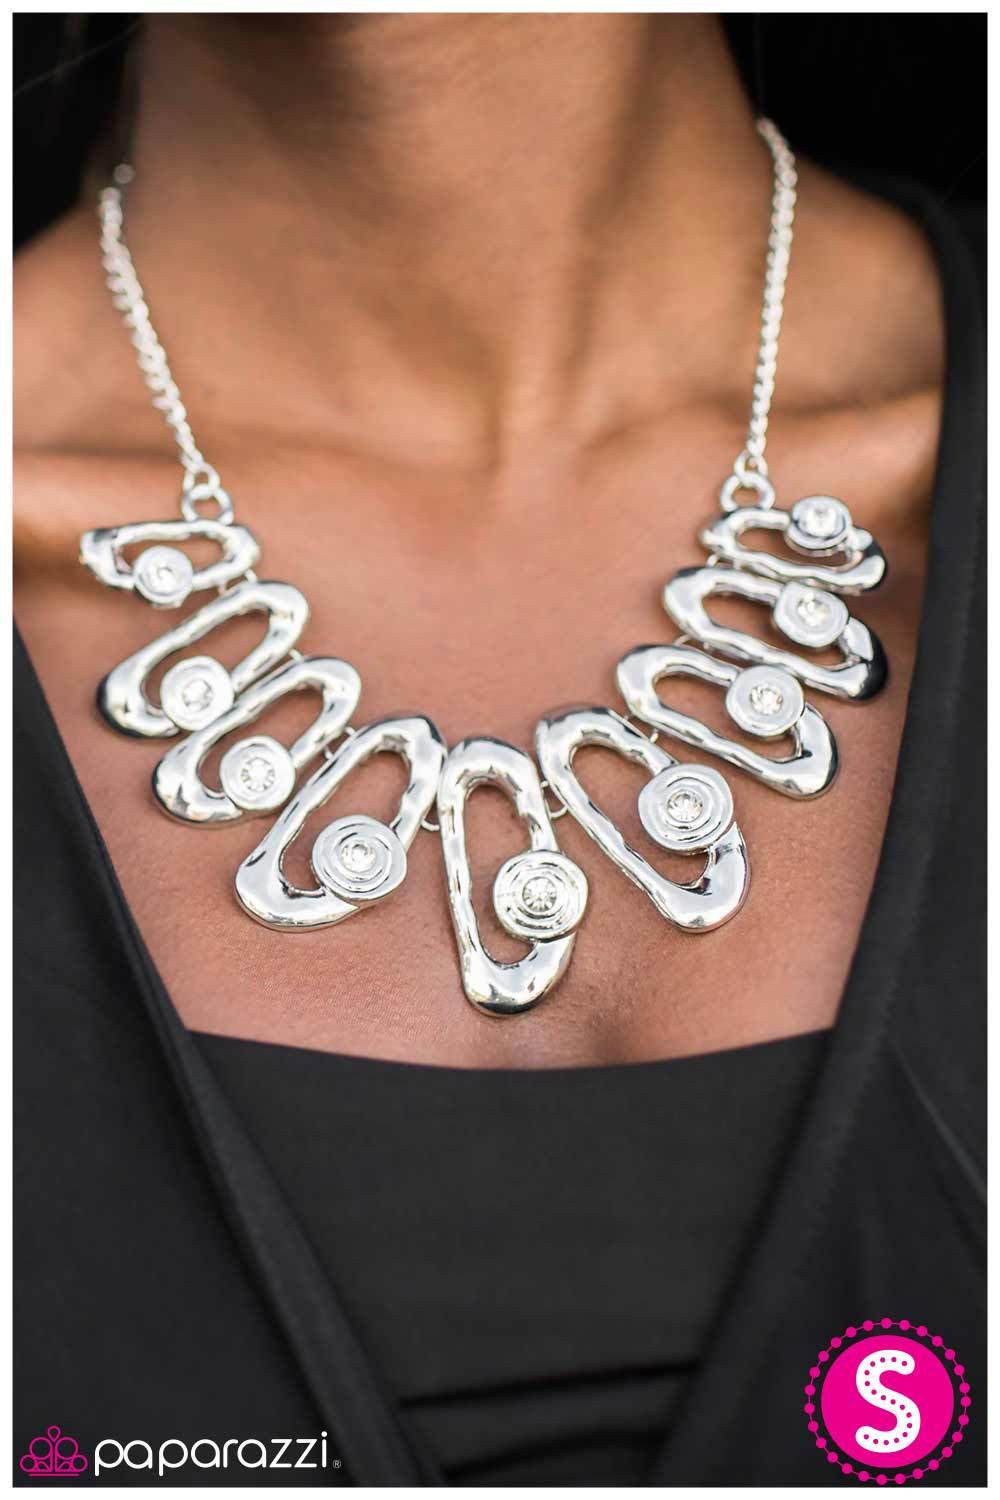 Take A Bow Silver and White Rhinestone Necklace - Paparazzi Accessories-CarasShop.com - $5 Jewelry by Cara Jewels